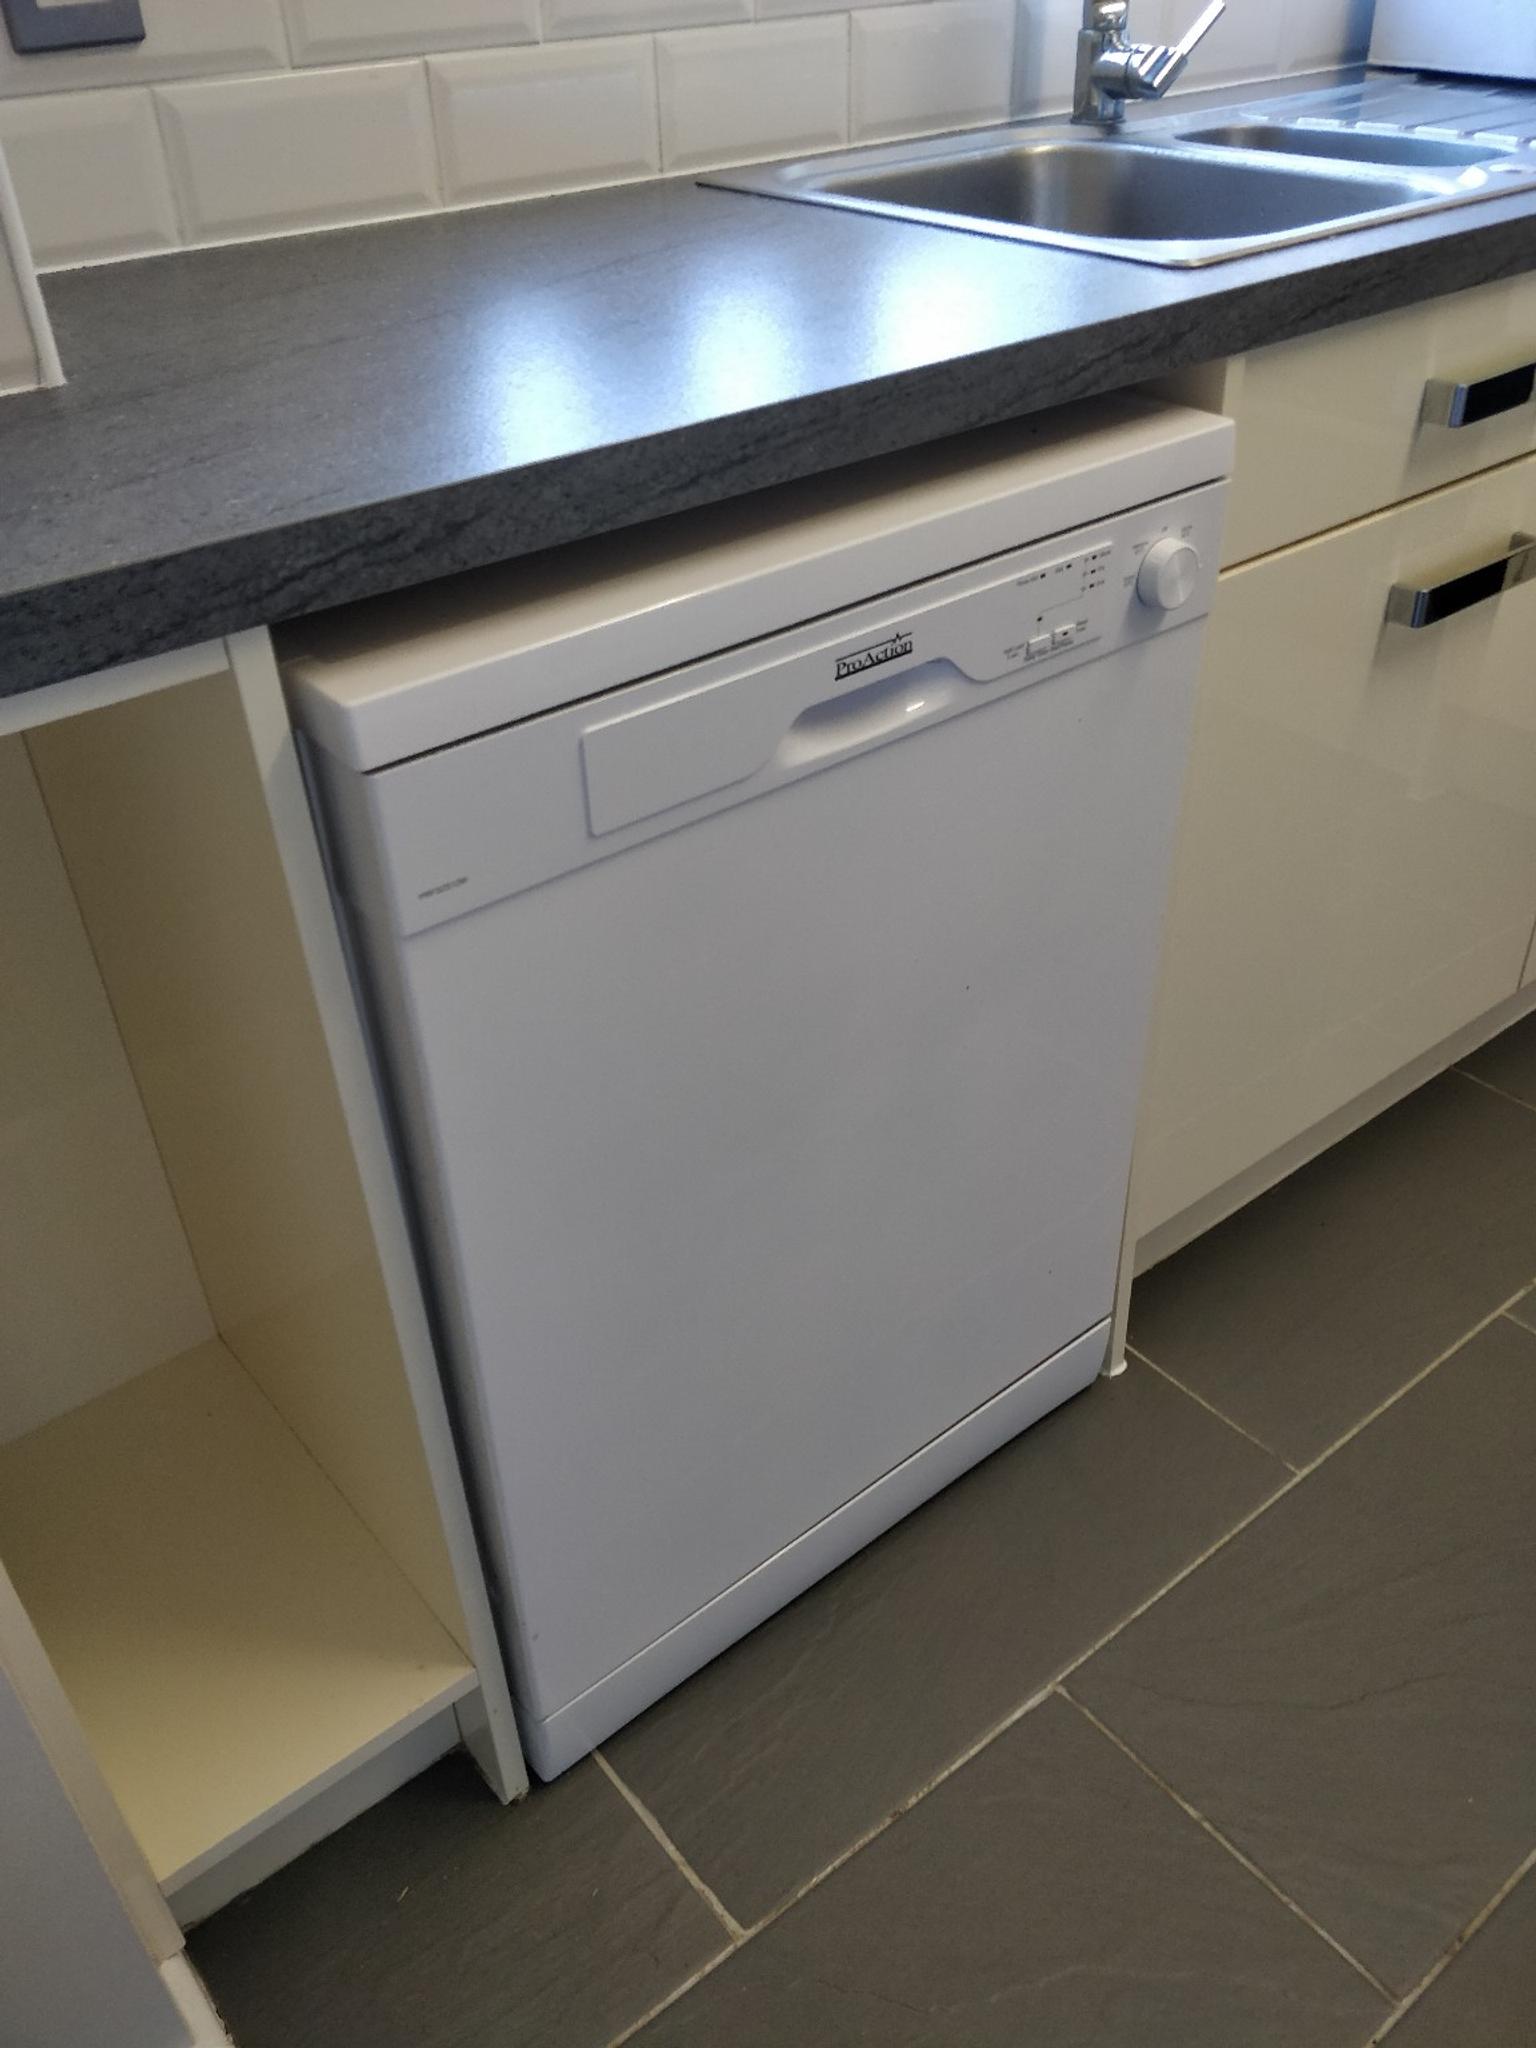 Proaction Full Size Standalone Dishwasher In Cosford For 40 00